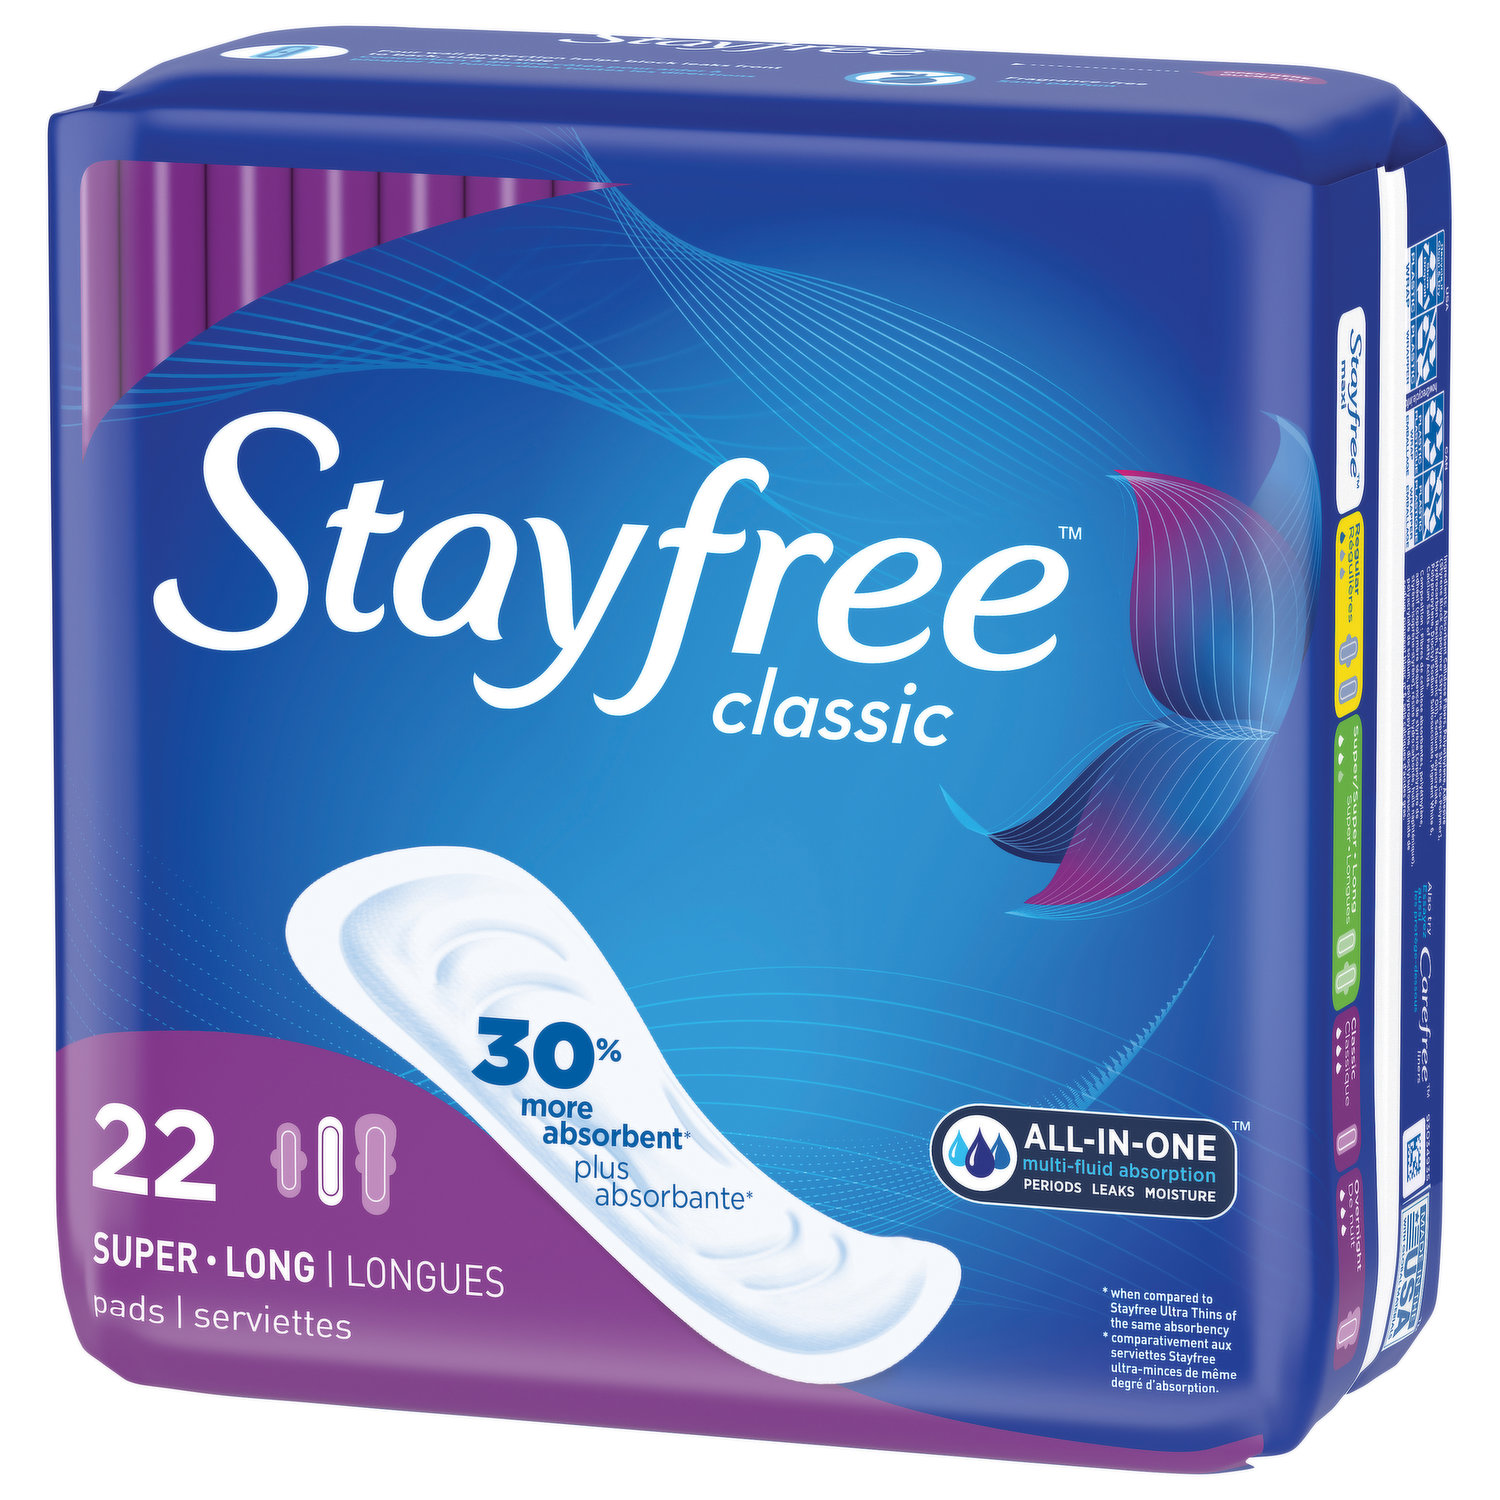 Stayfree Ultra Thin Pads, Overnight with Wings - 28 pads